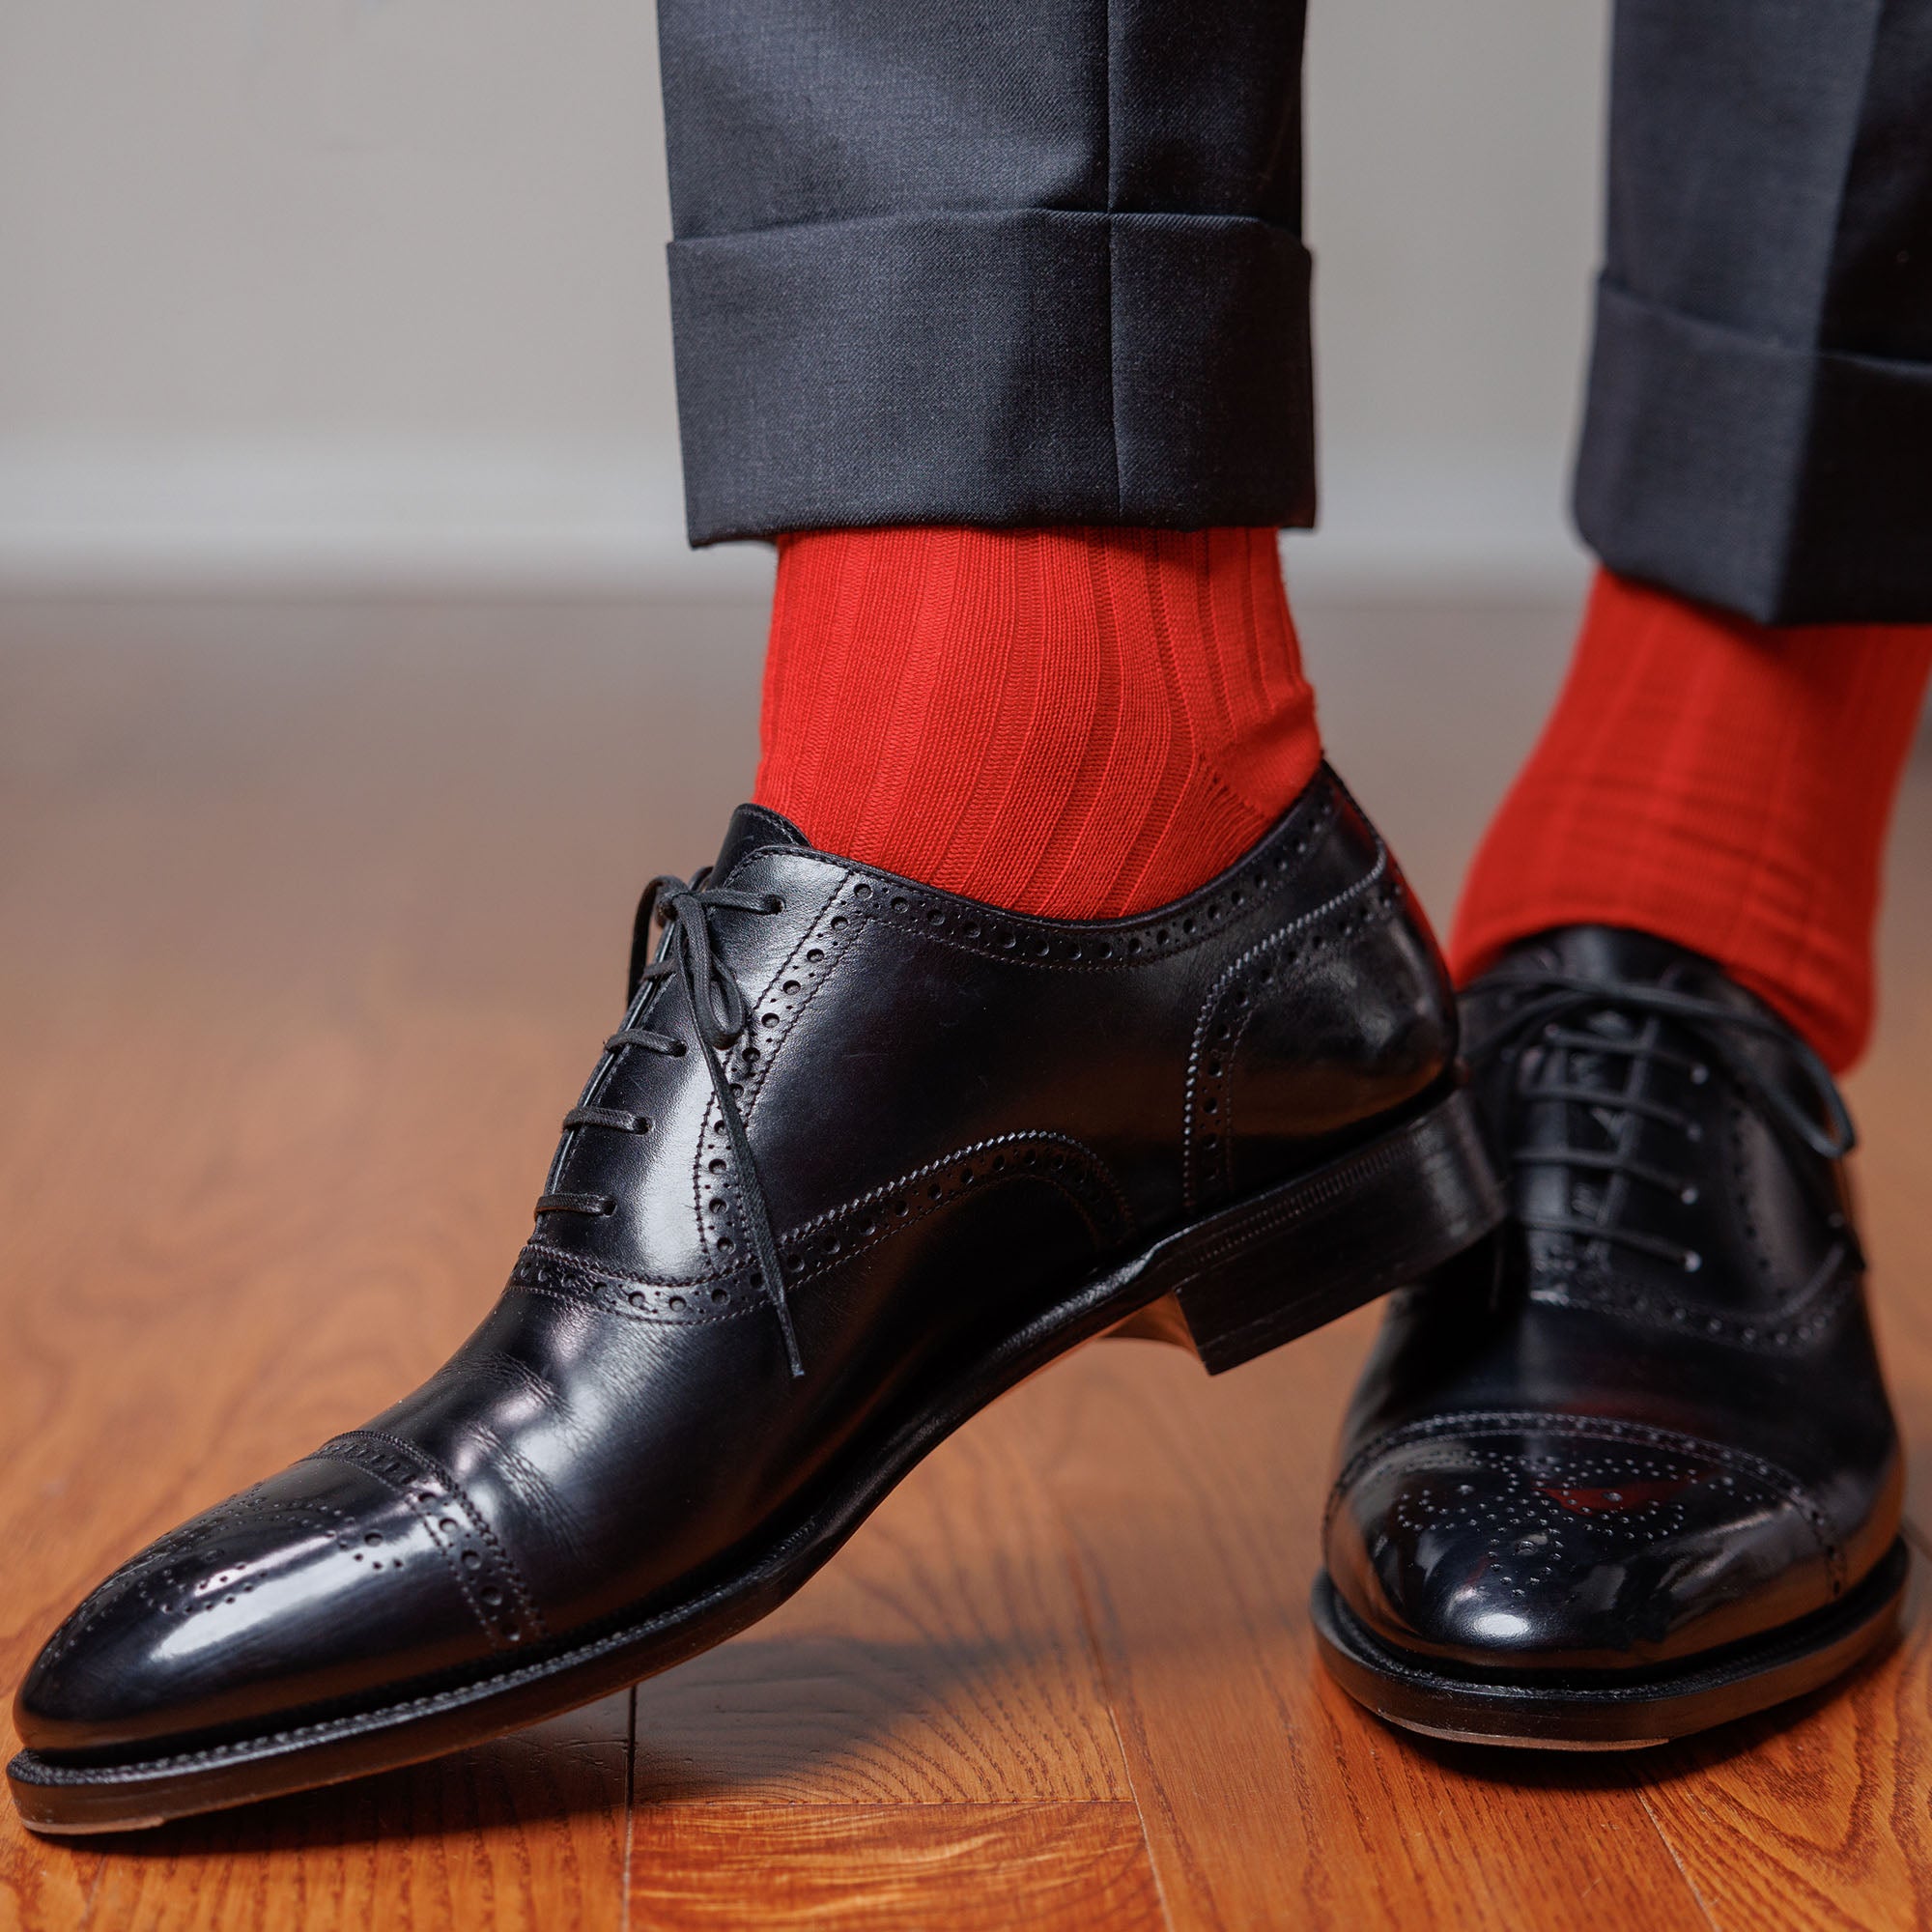 man wearing bright red dress socks with black oxfords and charcoal slacks standing on hardwood floor